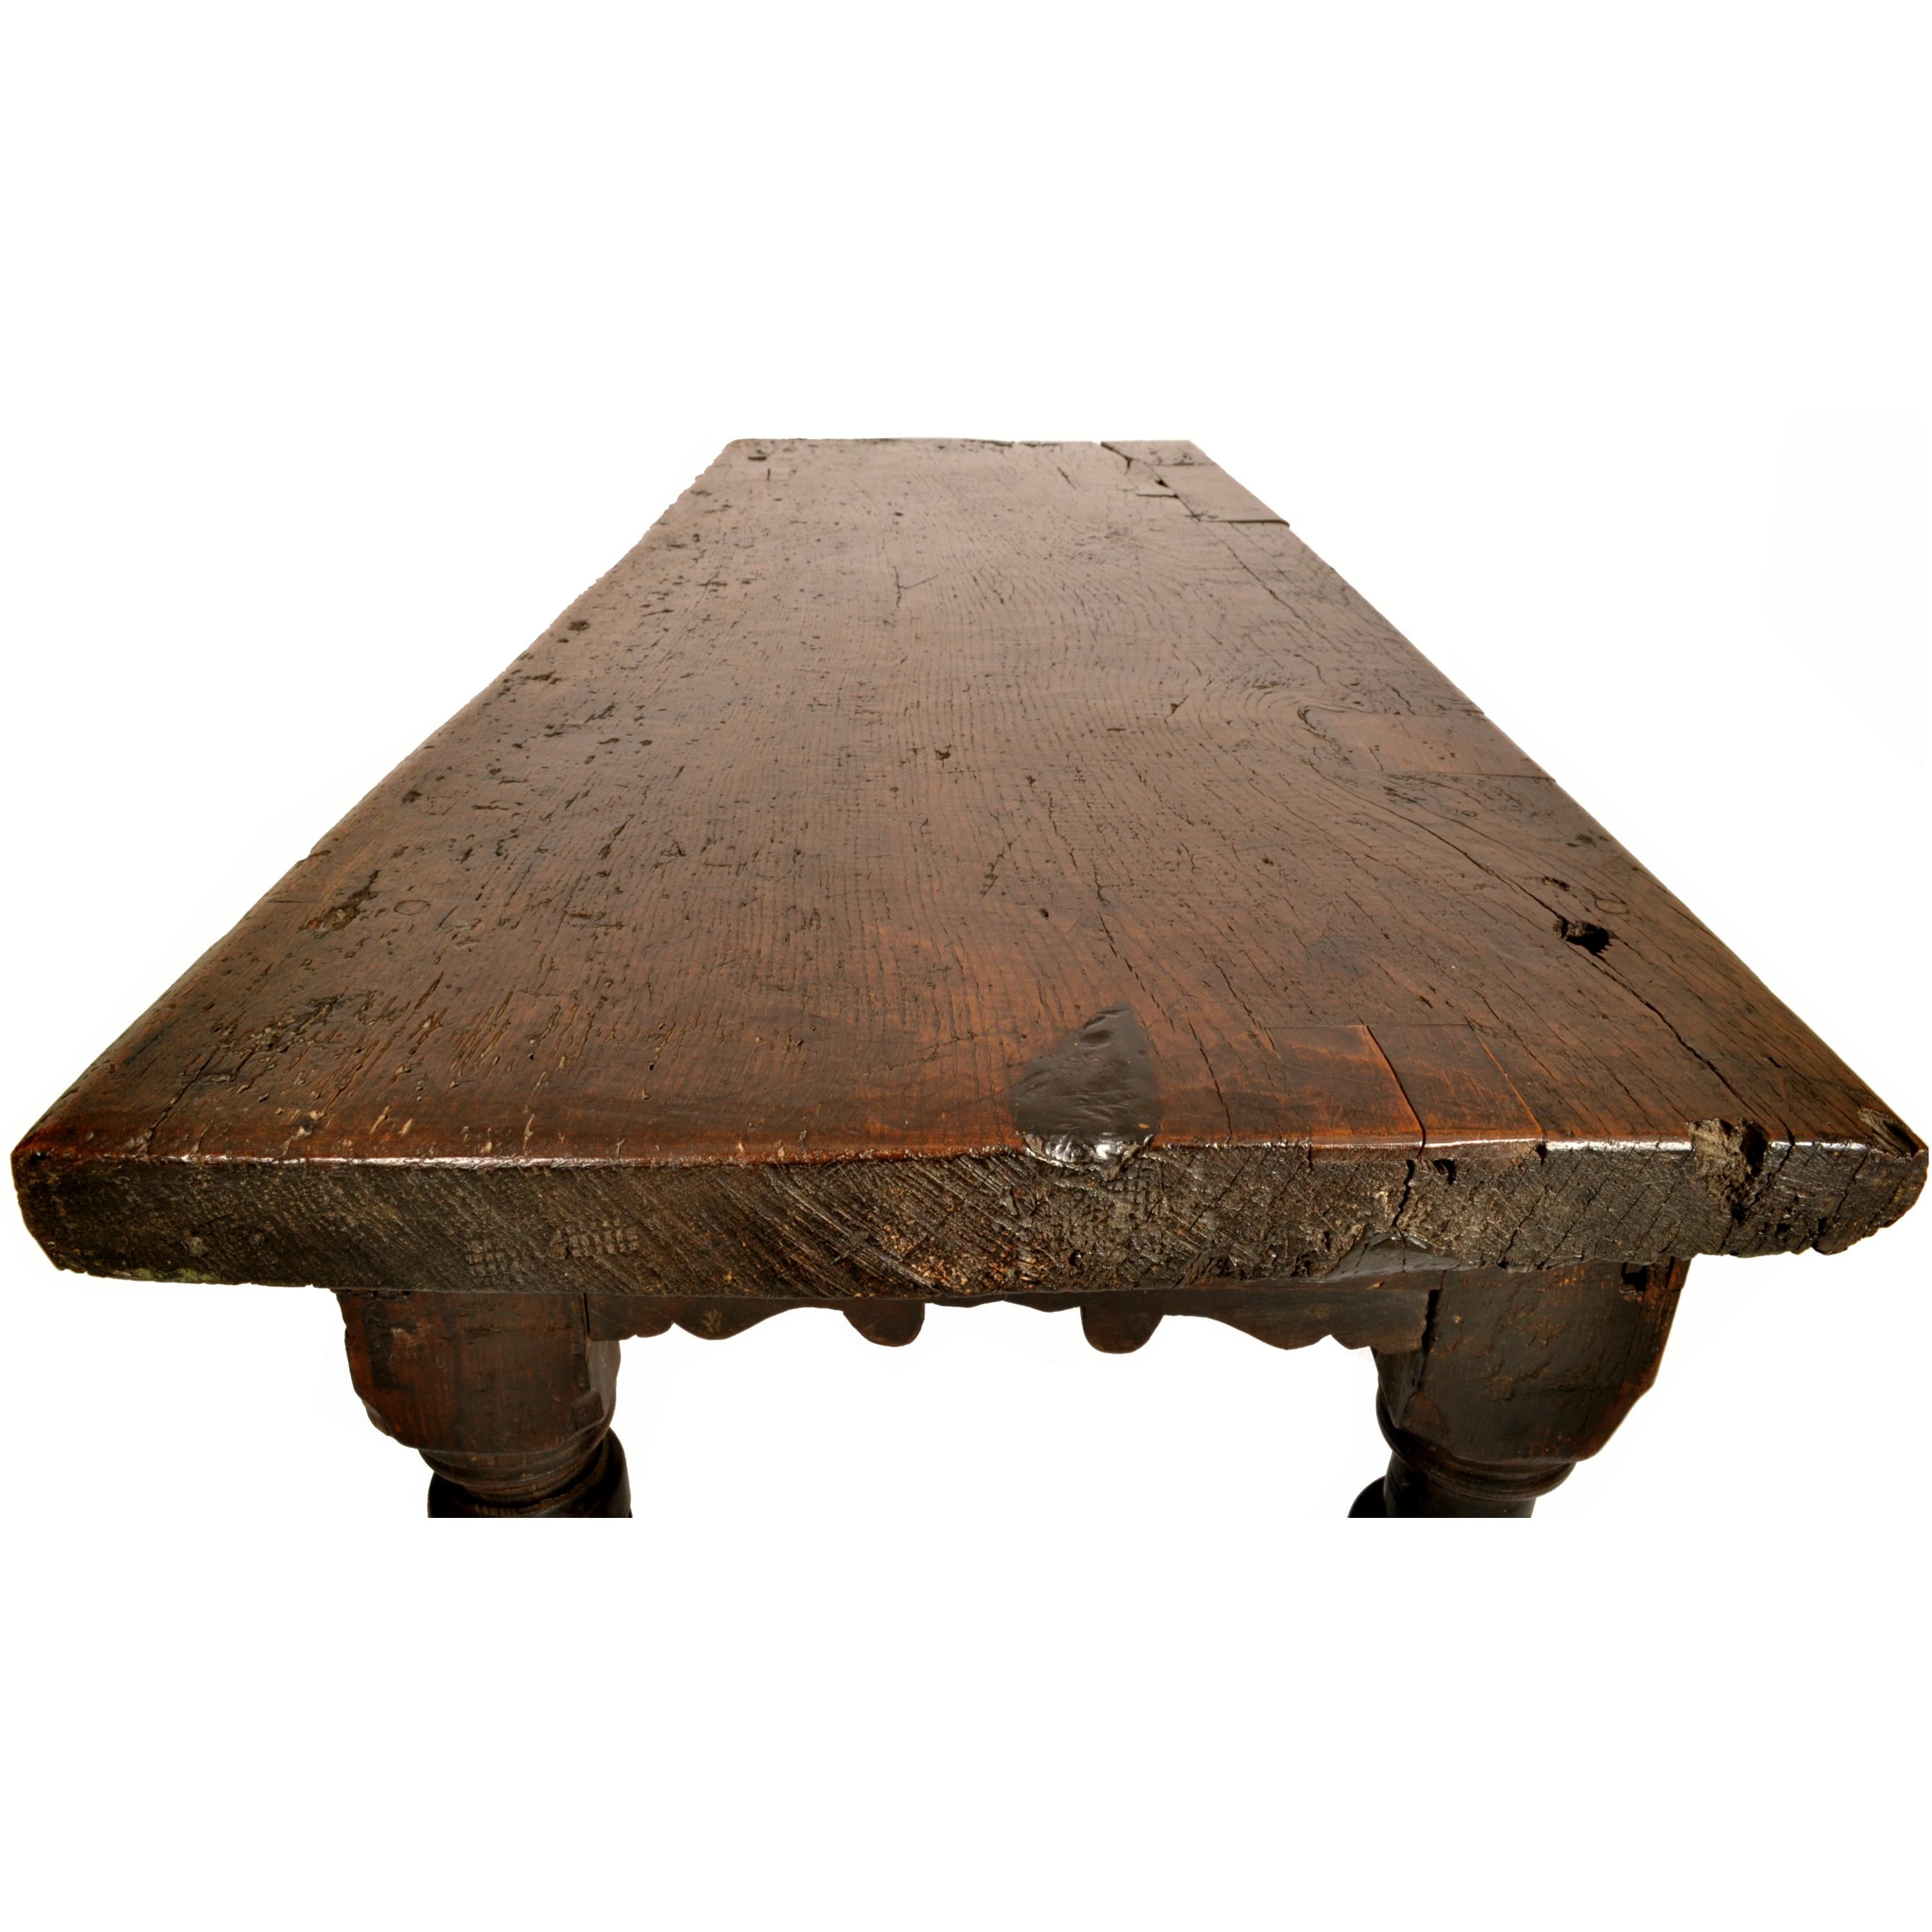 Antique 16th Century Elizabethan Tudor Carved Oak Dining Refectory Table, 1550 5